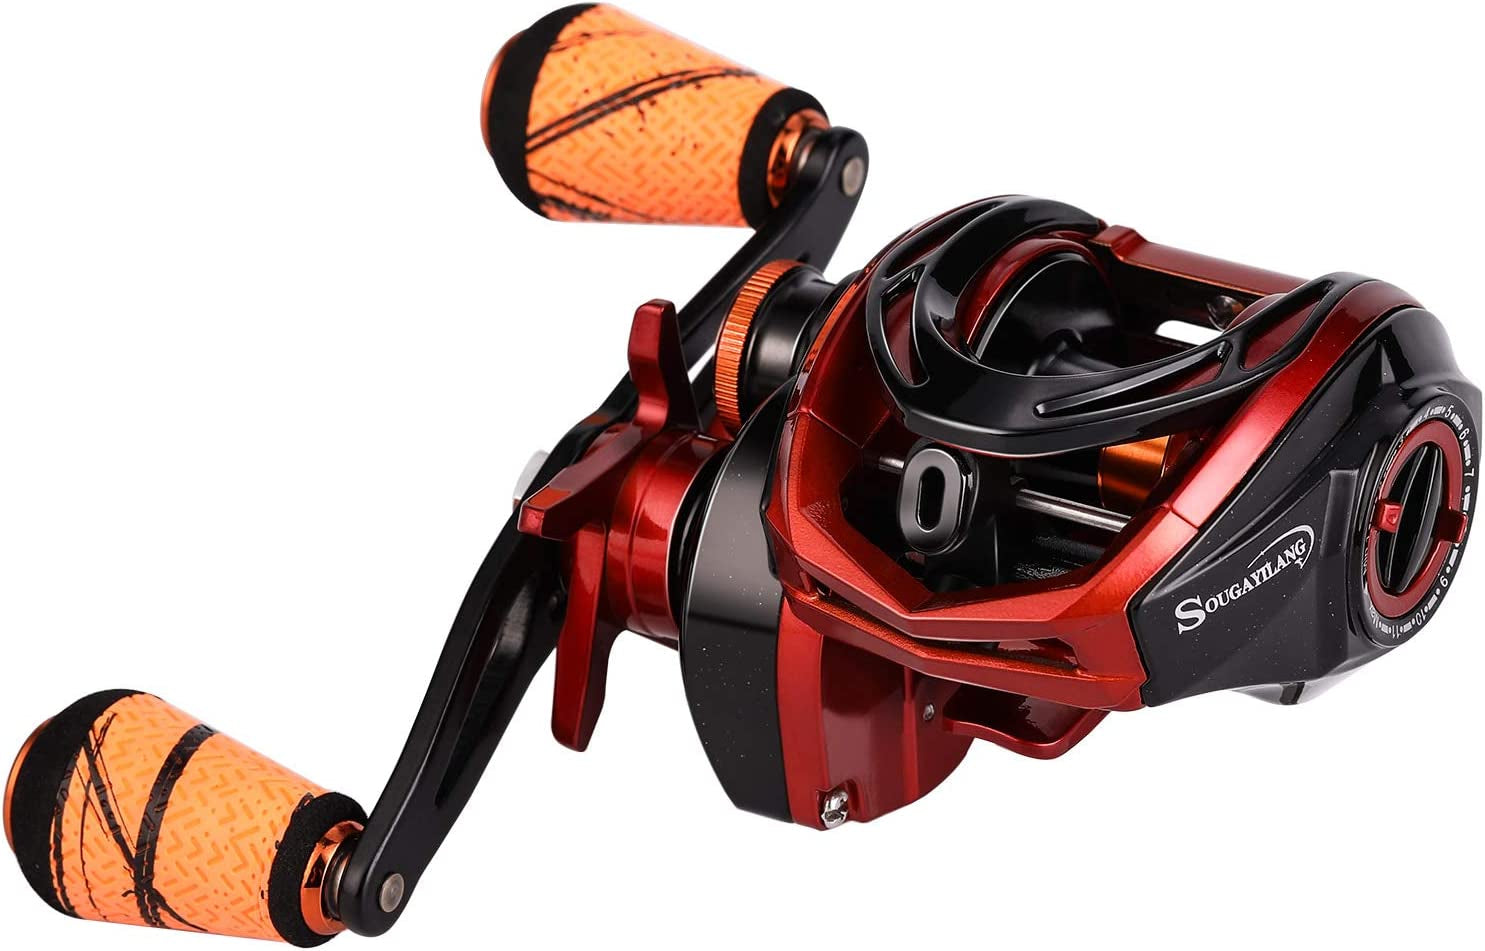 Fishing Baitcasting Reels, 7.3:1 Gear Ratio Fishing Reels , Low Profile Reel with Magnetic Braking System , Super Polymer Grips,Carbon Infused Nylon Frame